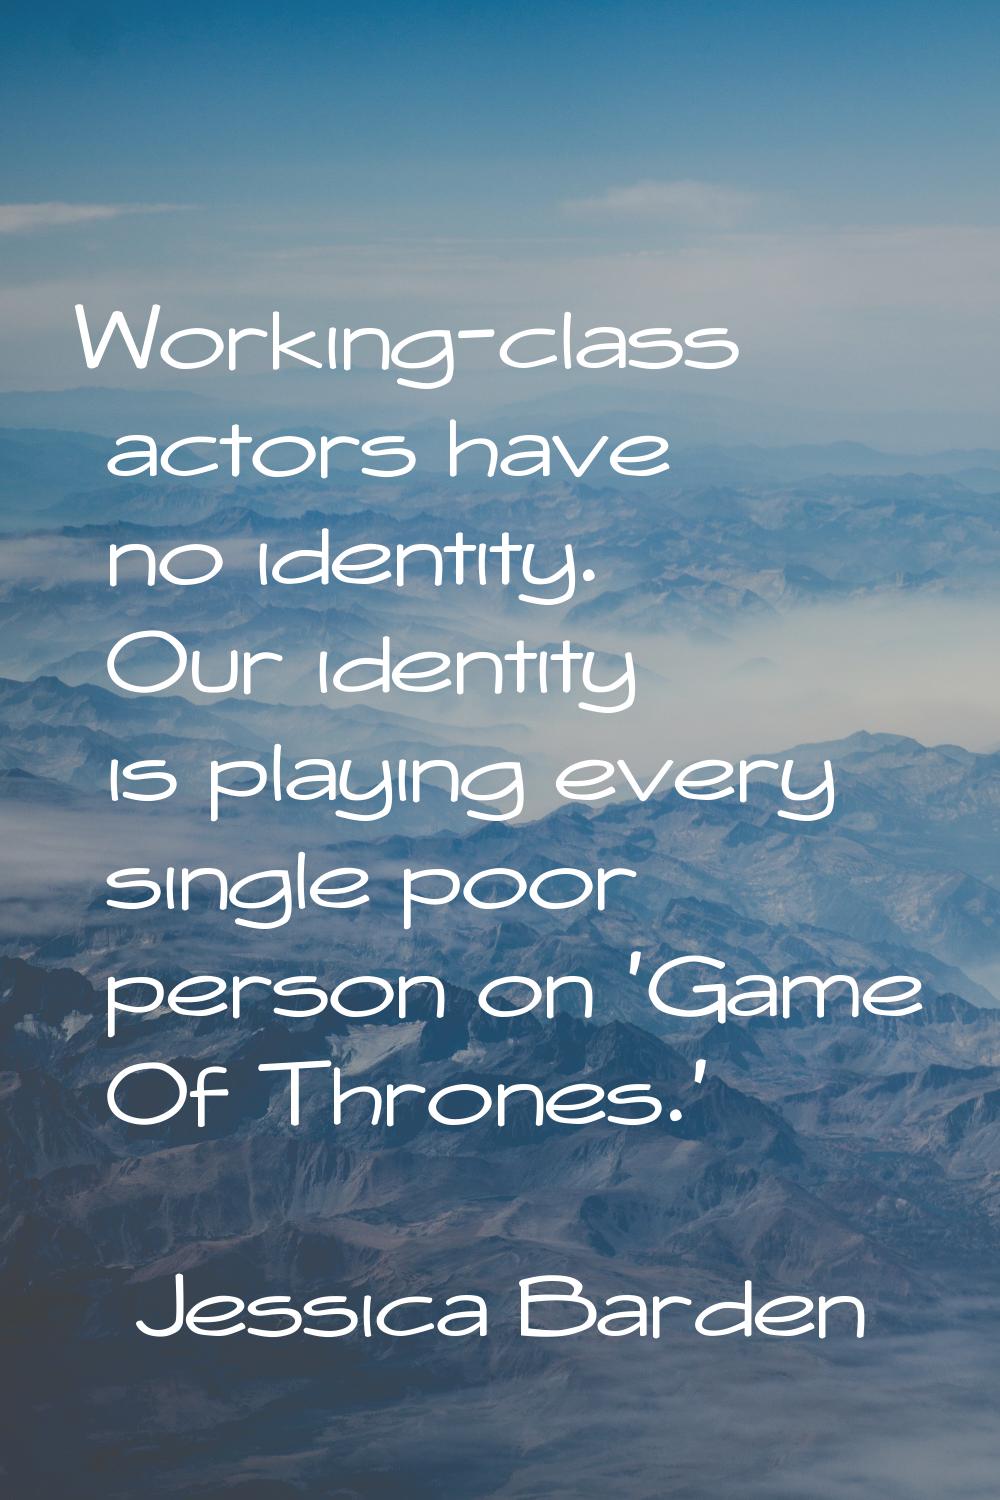 Working-class actors have no identity. Our identity is playing every single poor person on 'Game Of